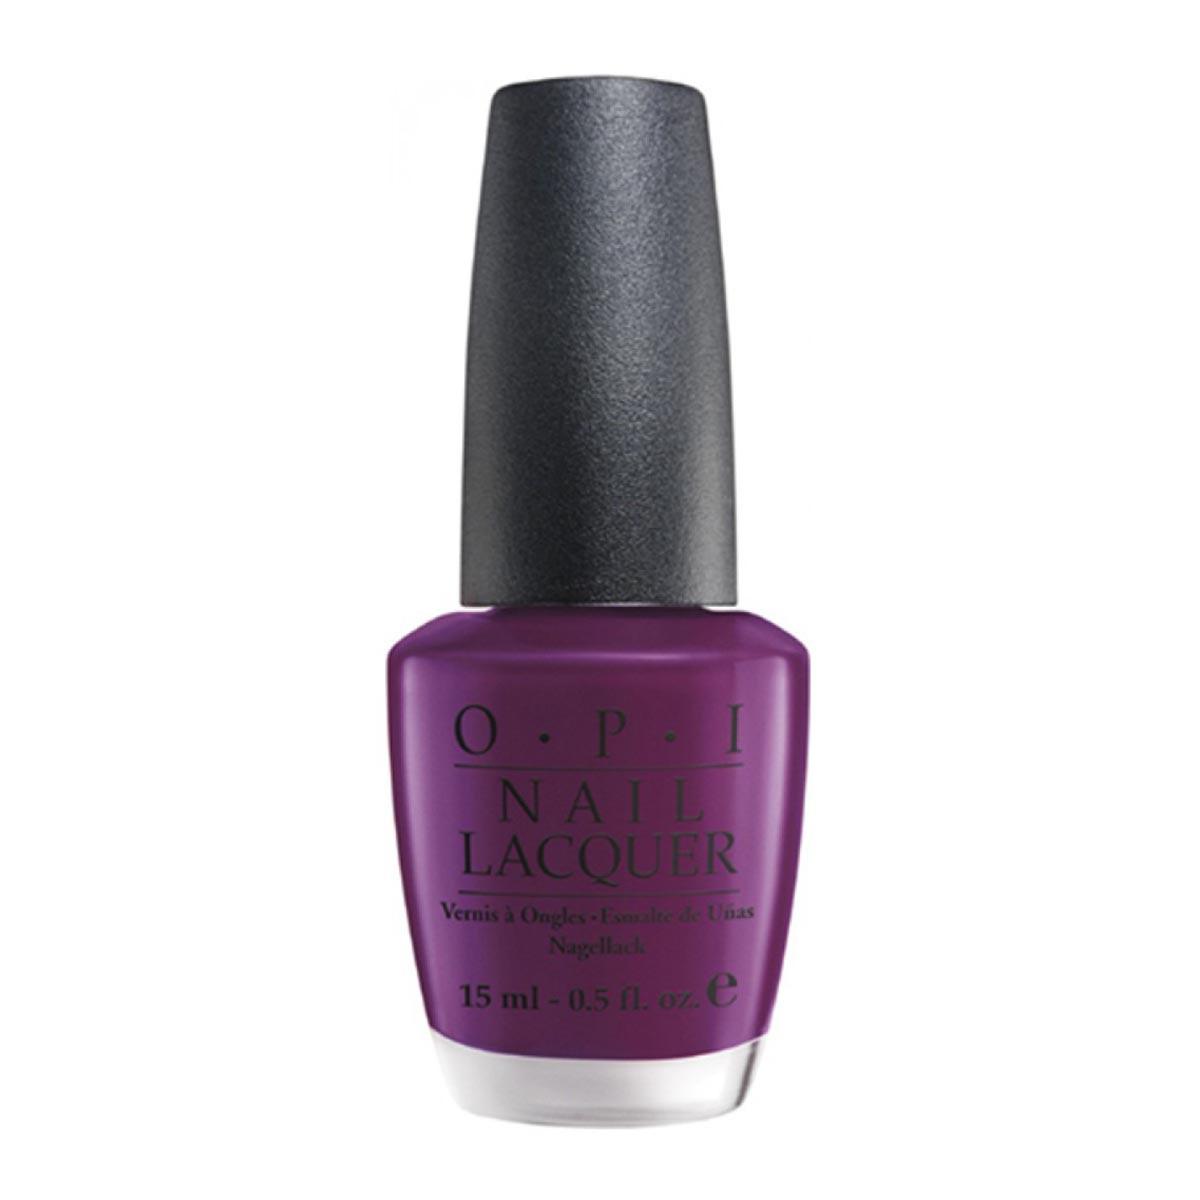 opi-nail-lacquer-nle50-pamplona-purple